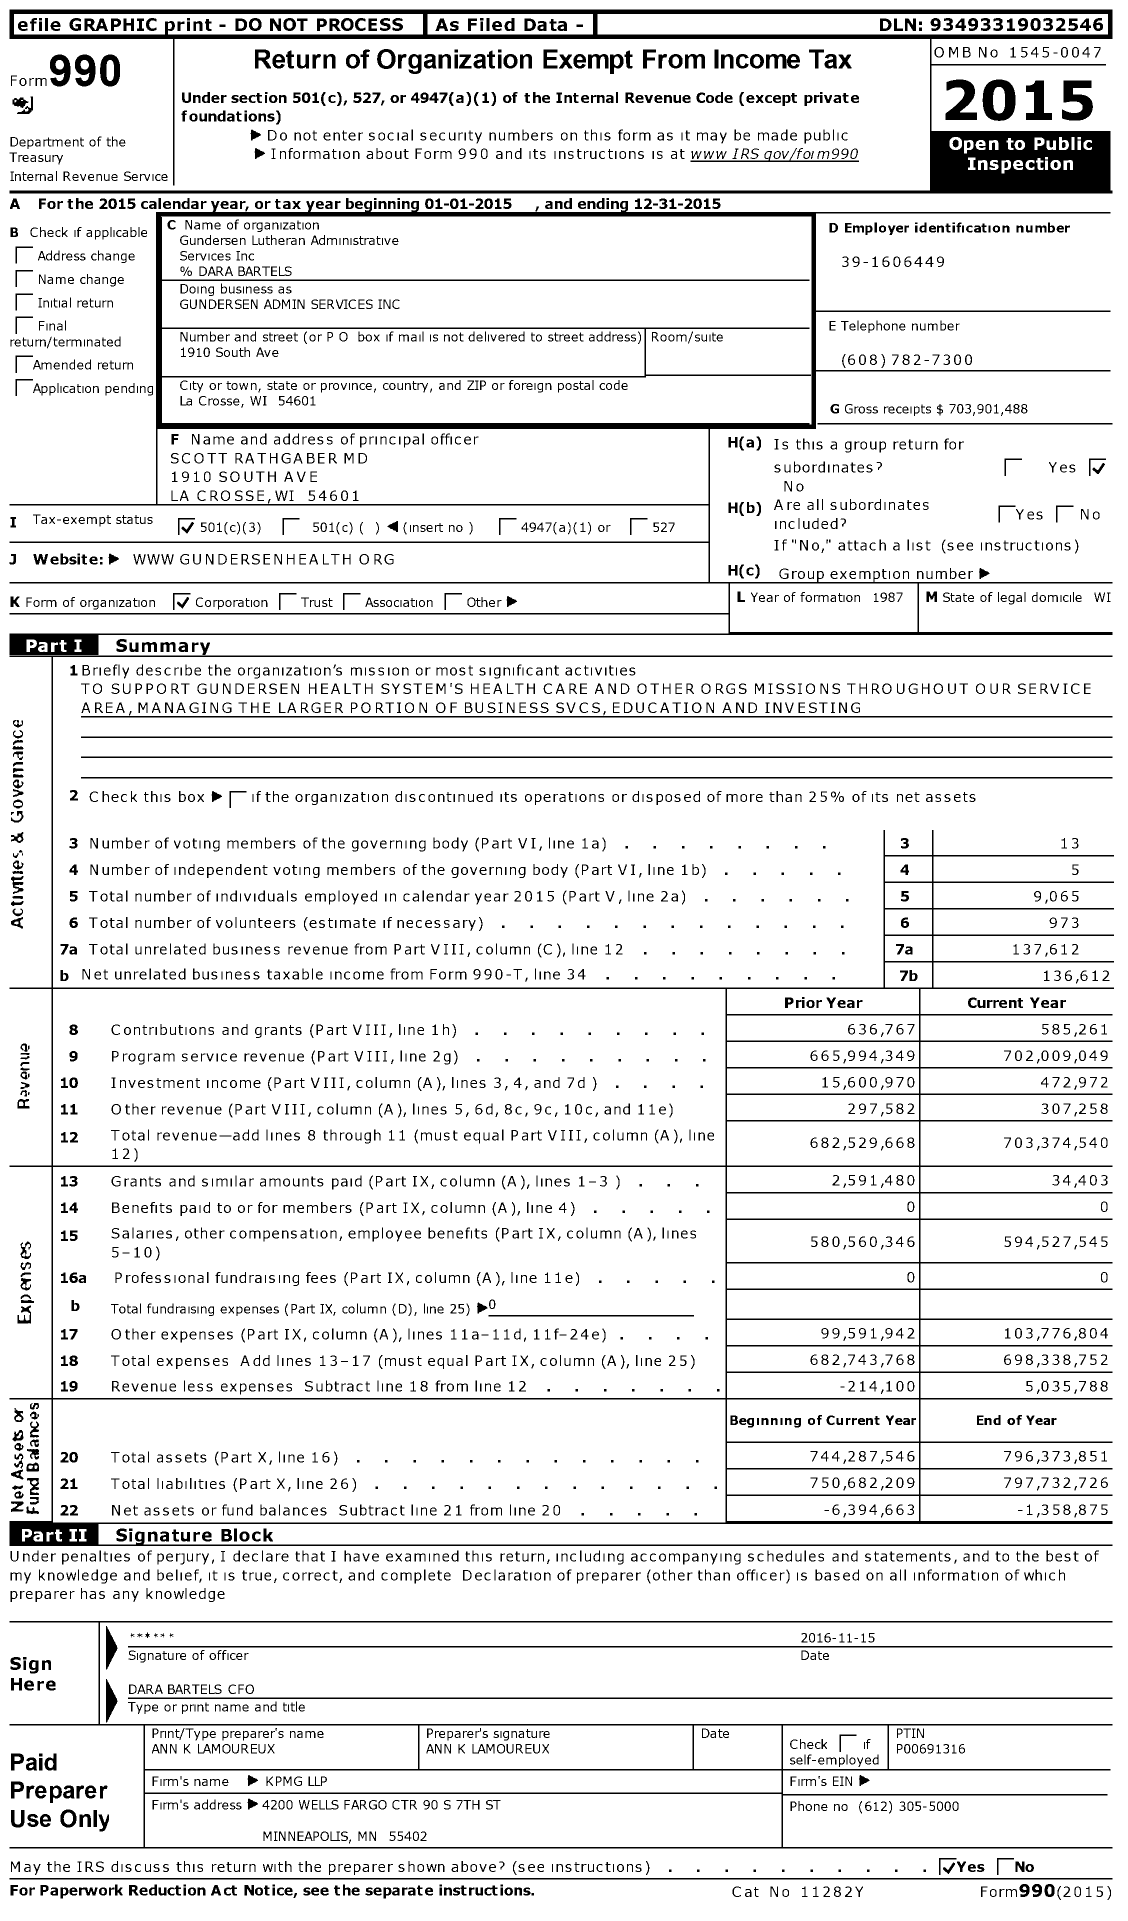 Image of first page of 2015 Form 990 for GUNDERSEN Administrative SERVICES